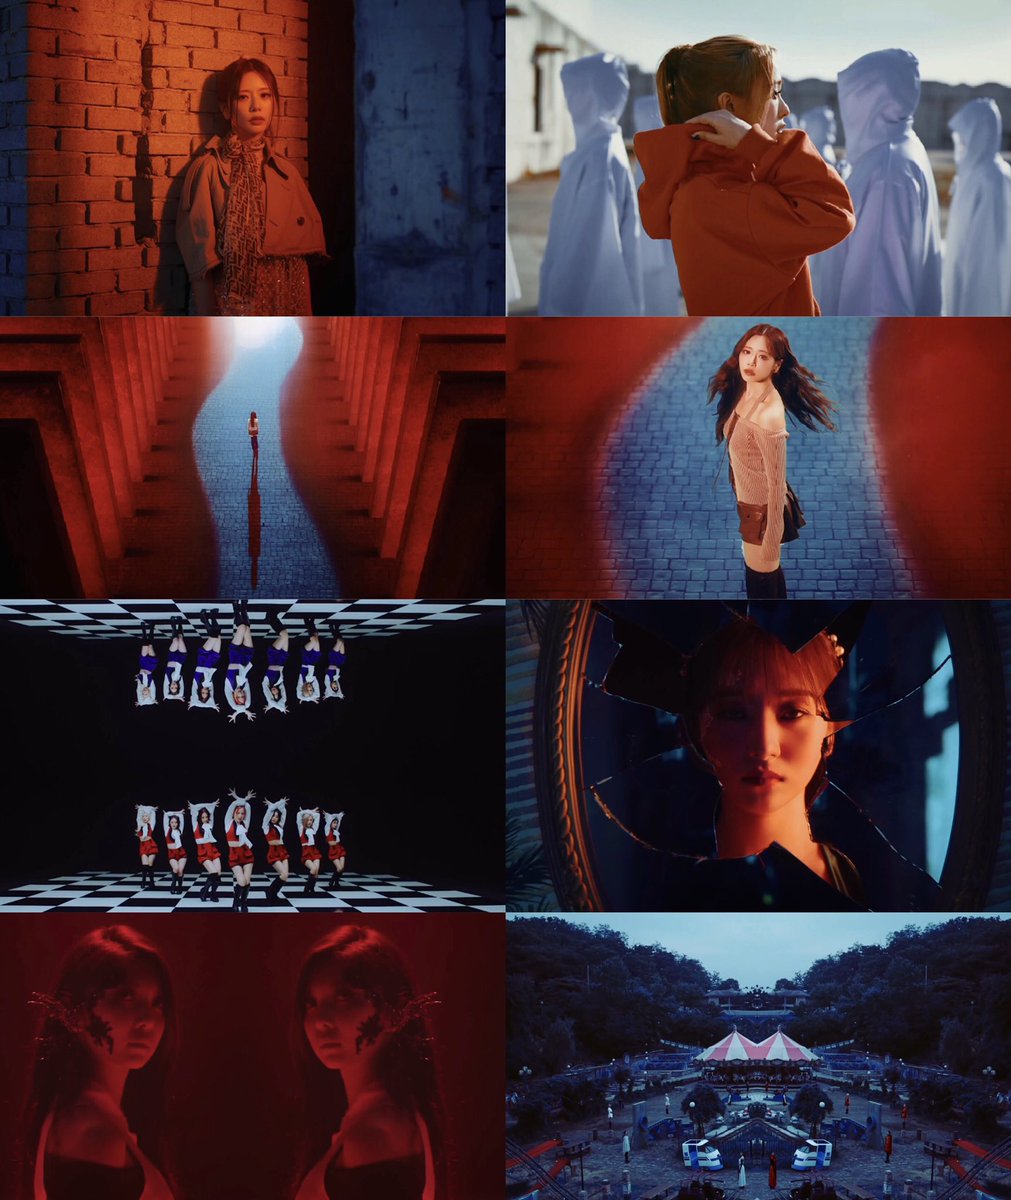 I’ve been thinking about this since the first time I saw BONVOYAGE’s music video, that it really reminds me of BEcause! Especially the colorstory and the contrasts.